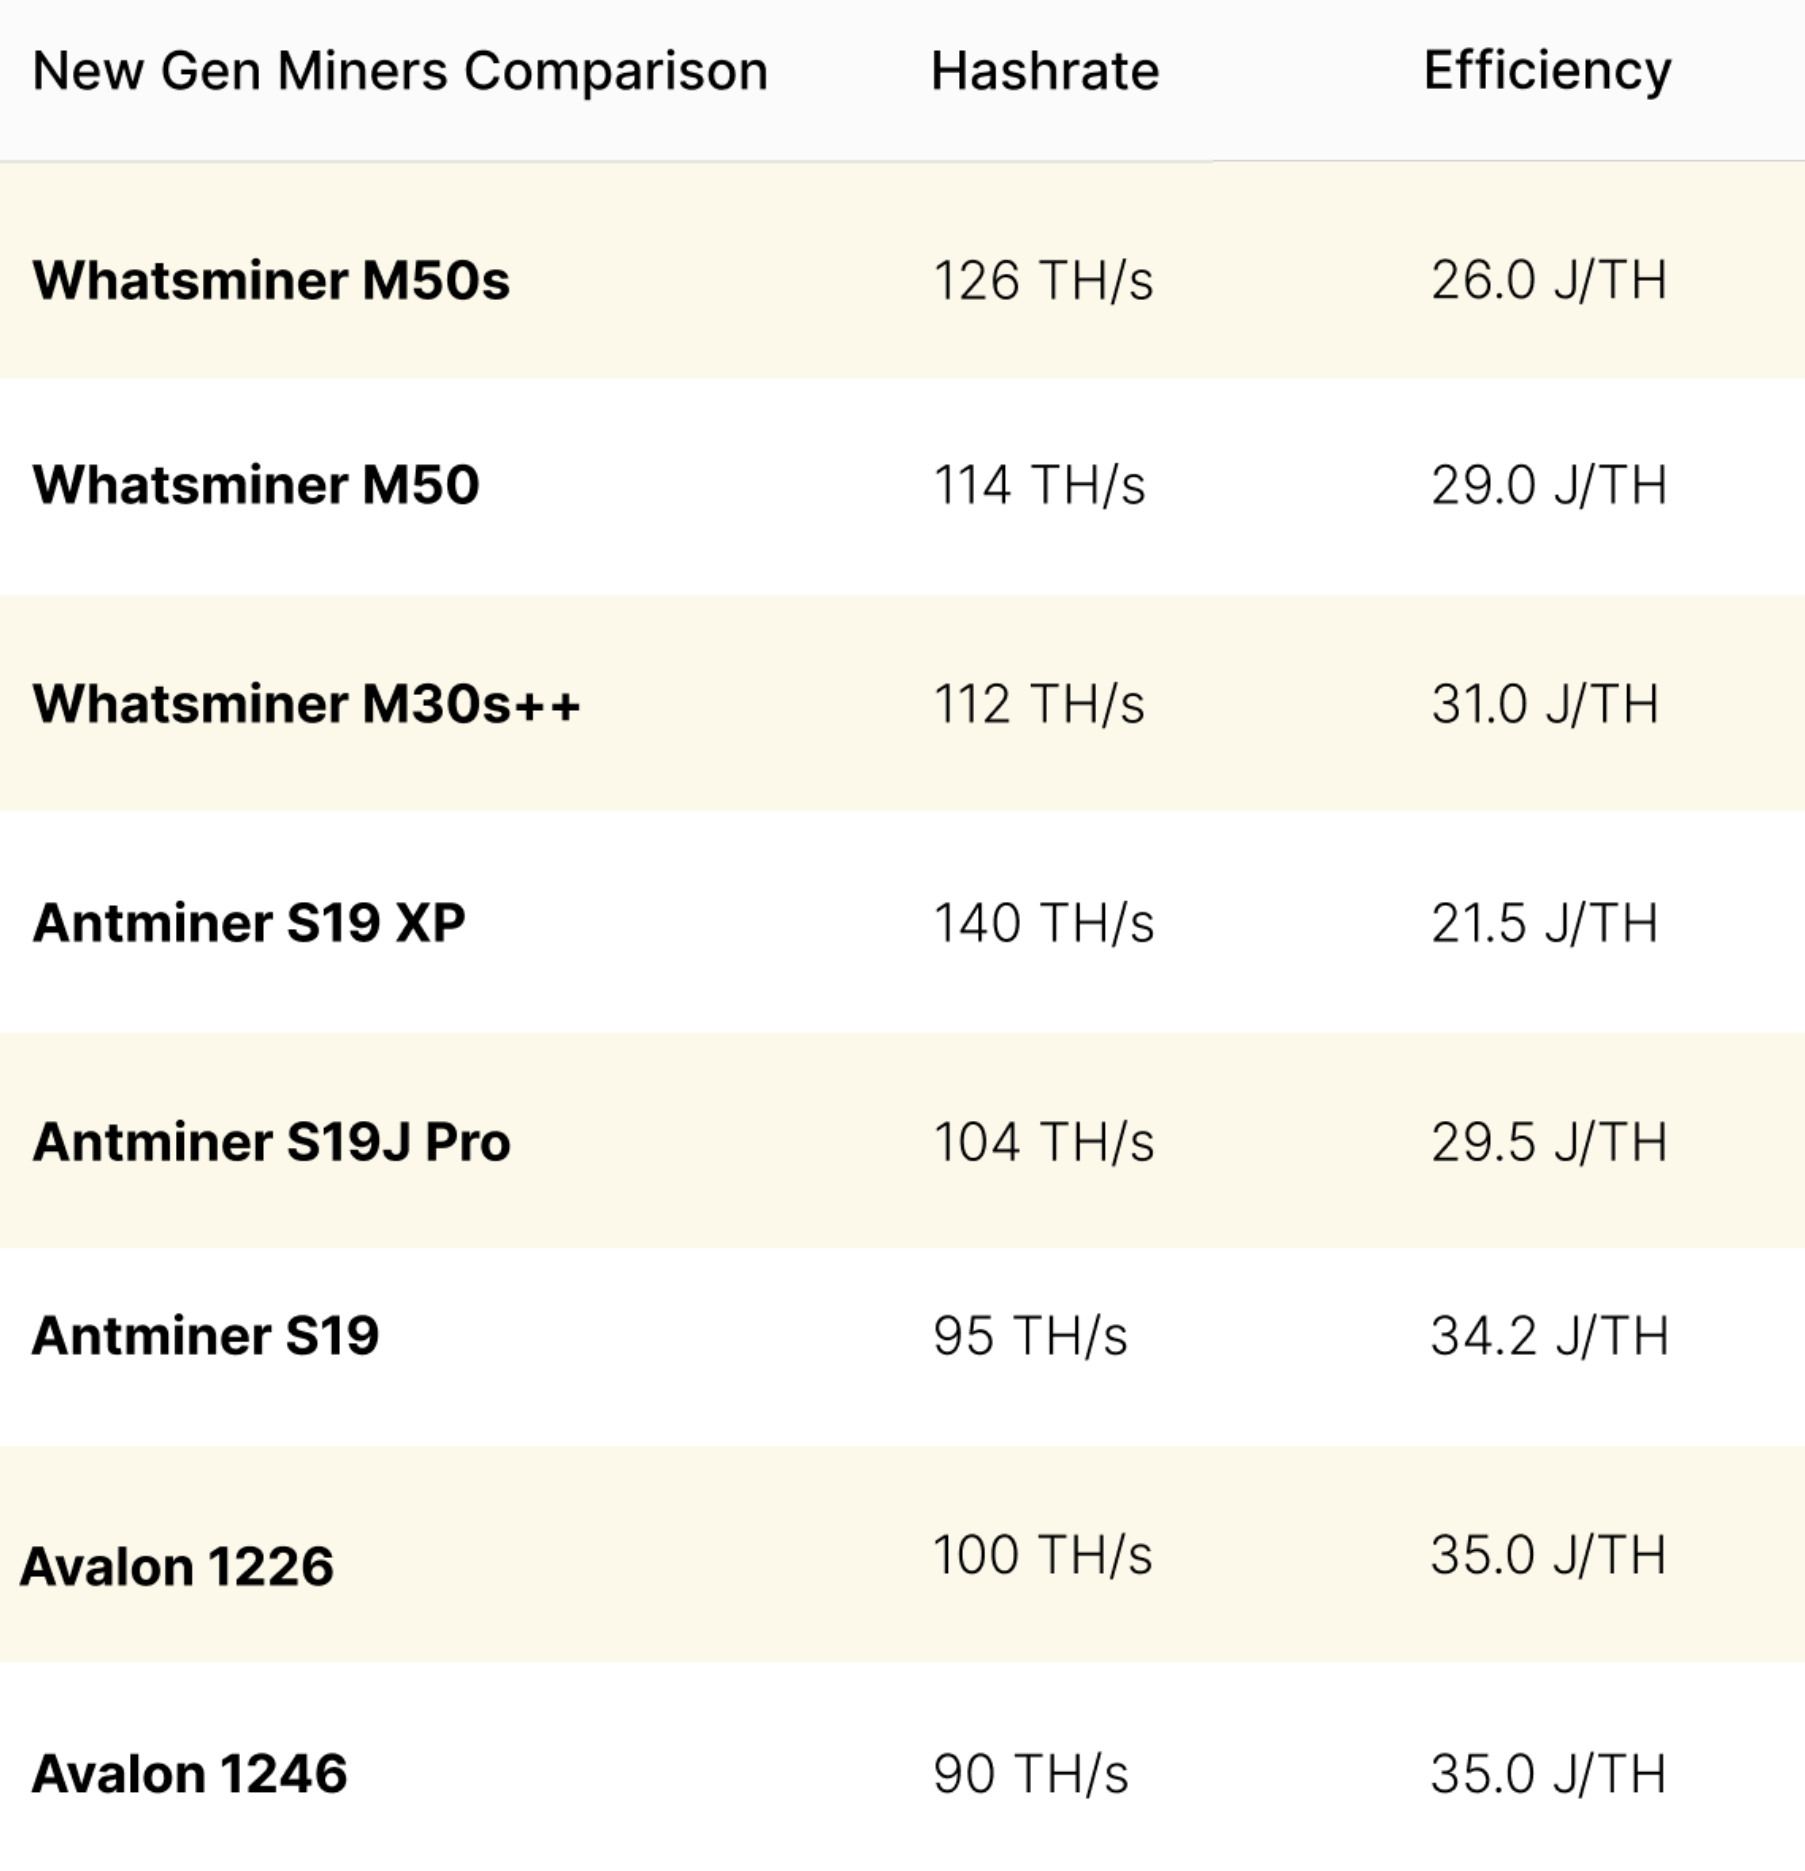 Whatsminer M50s hashrate and efficiency compared to the Antminer S19 series and Avalon 1200 series. | Source: Hashrate Index ASICs Page